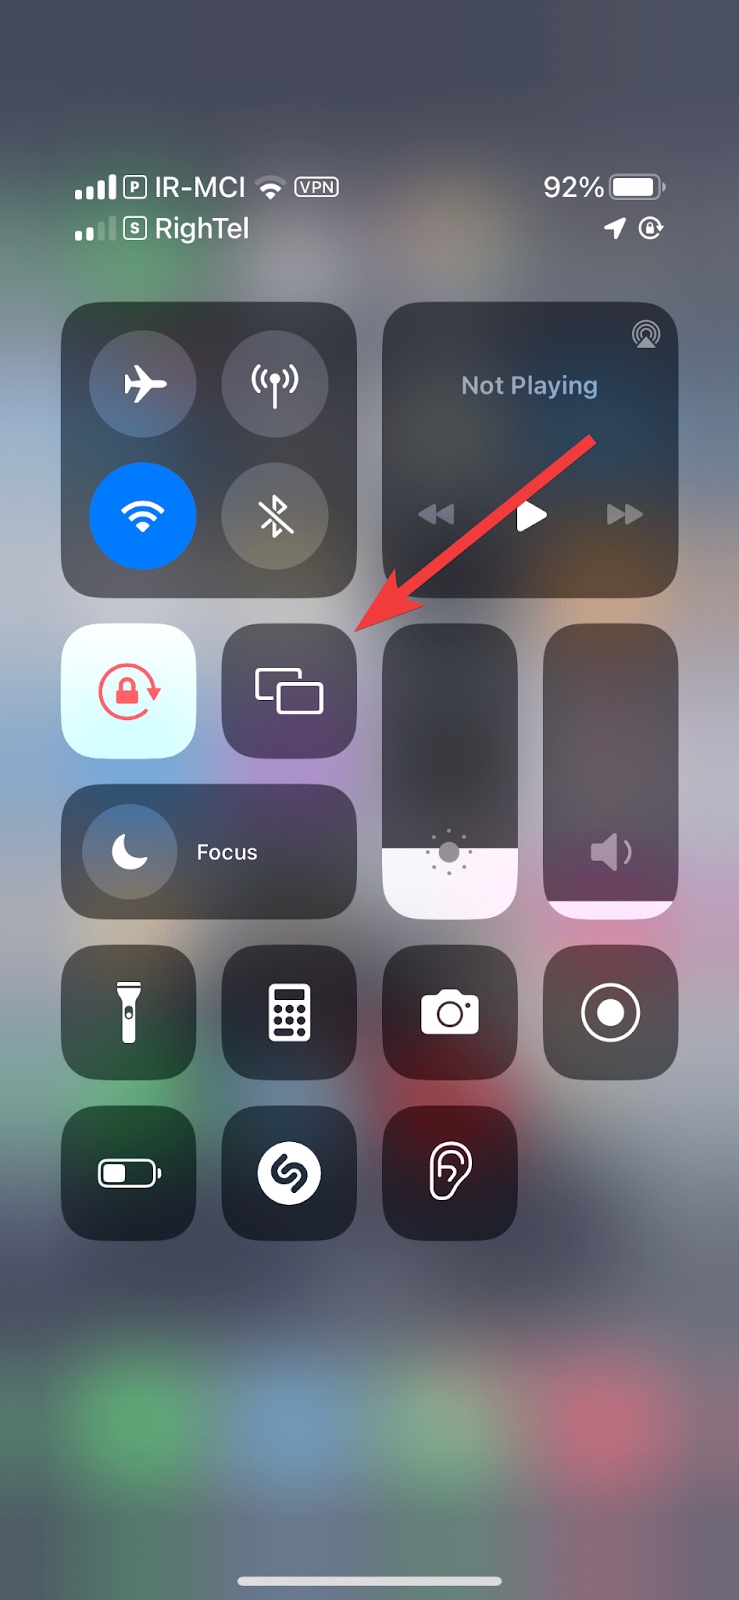 Go to the Control Center and tap on the Screen Mirroring icon